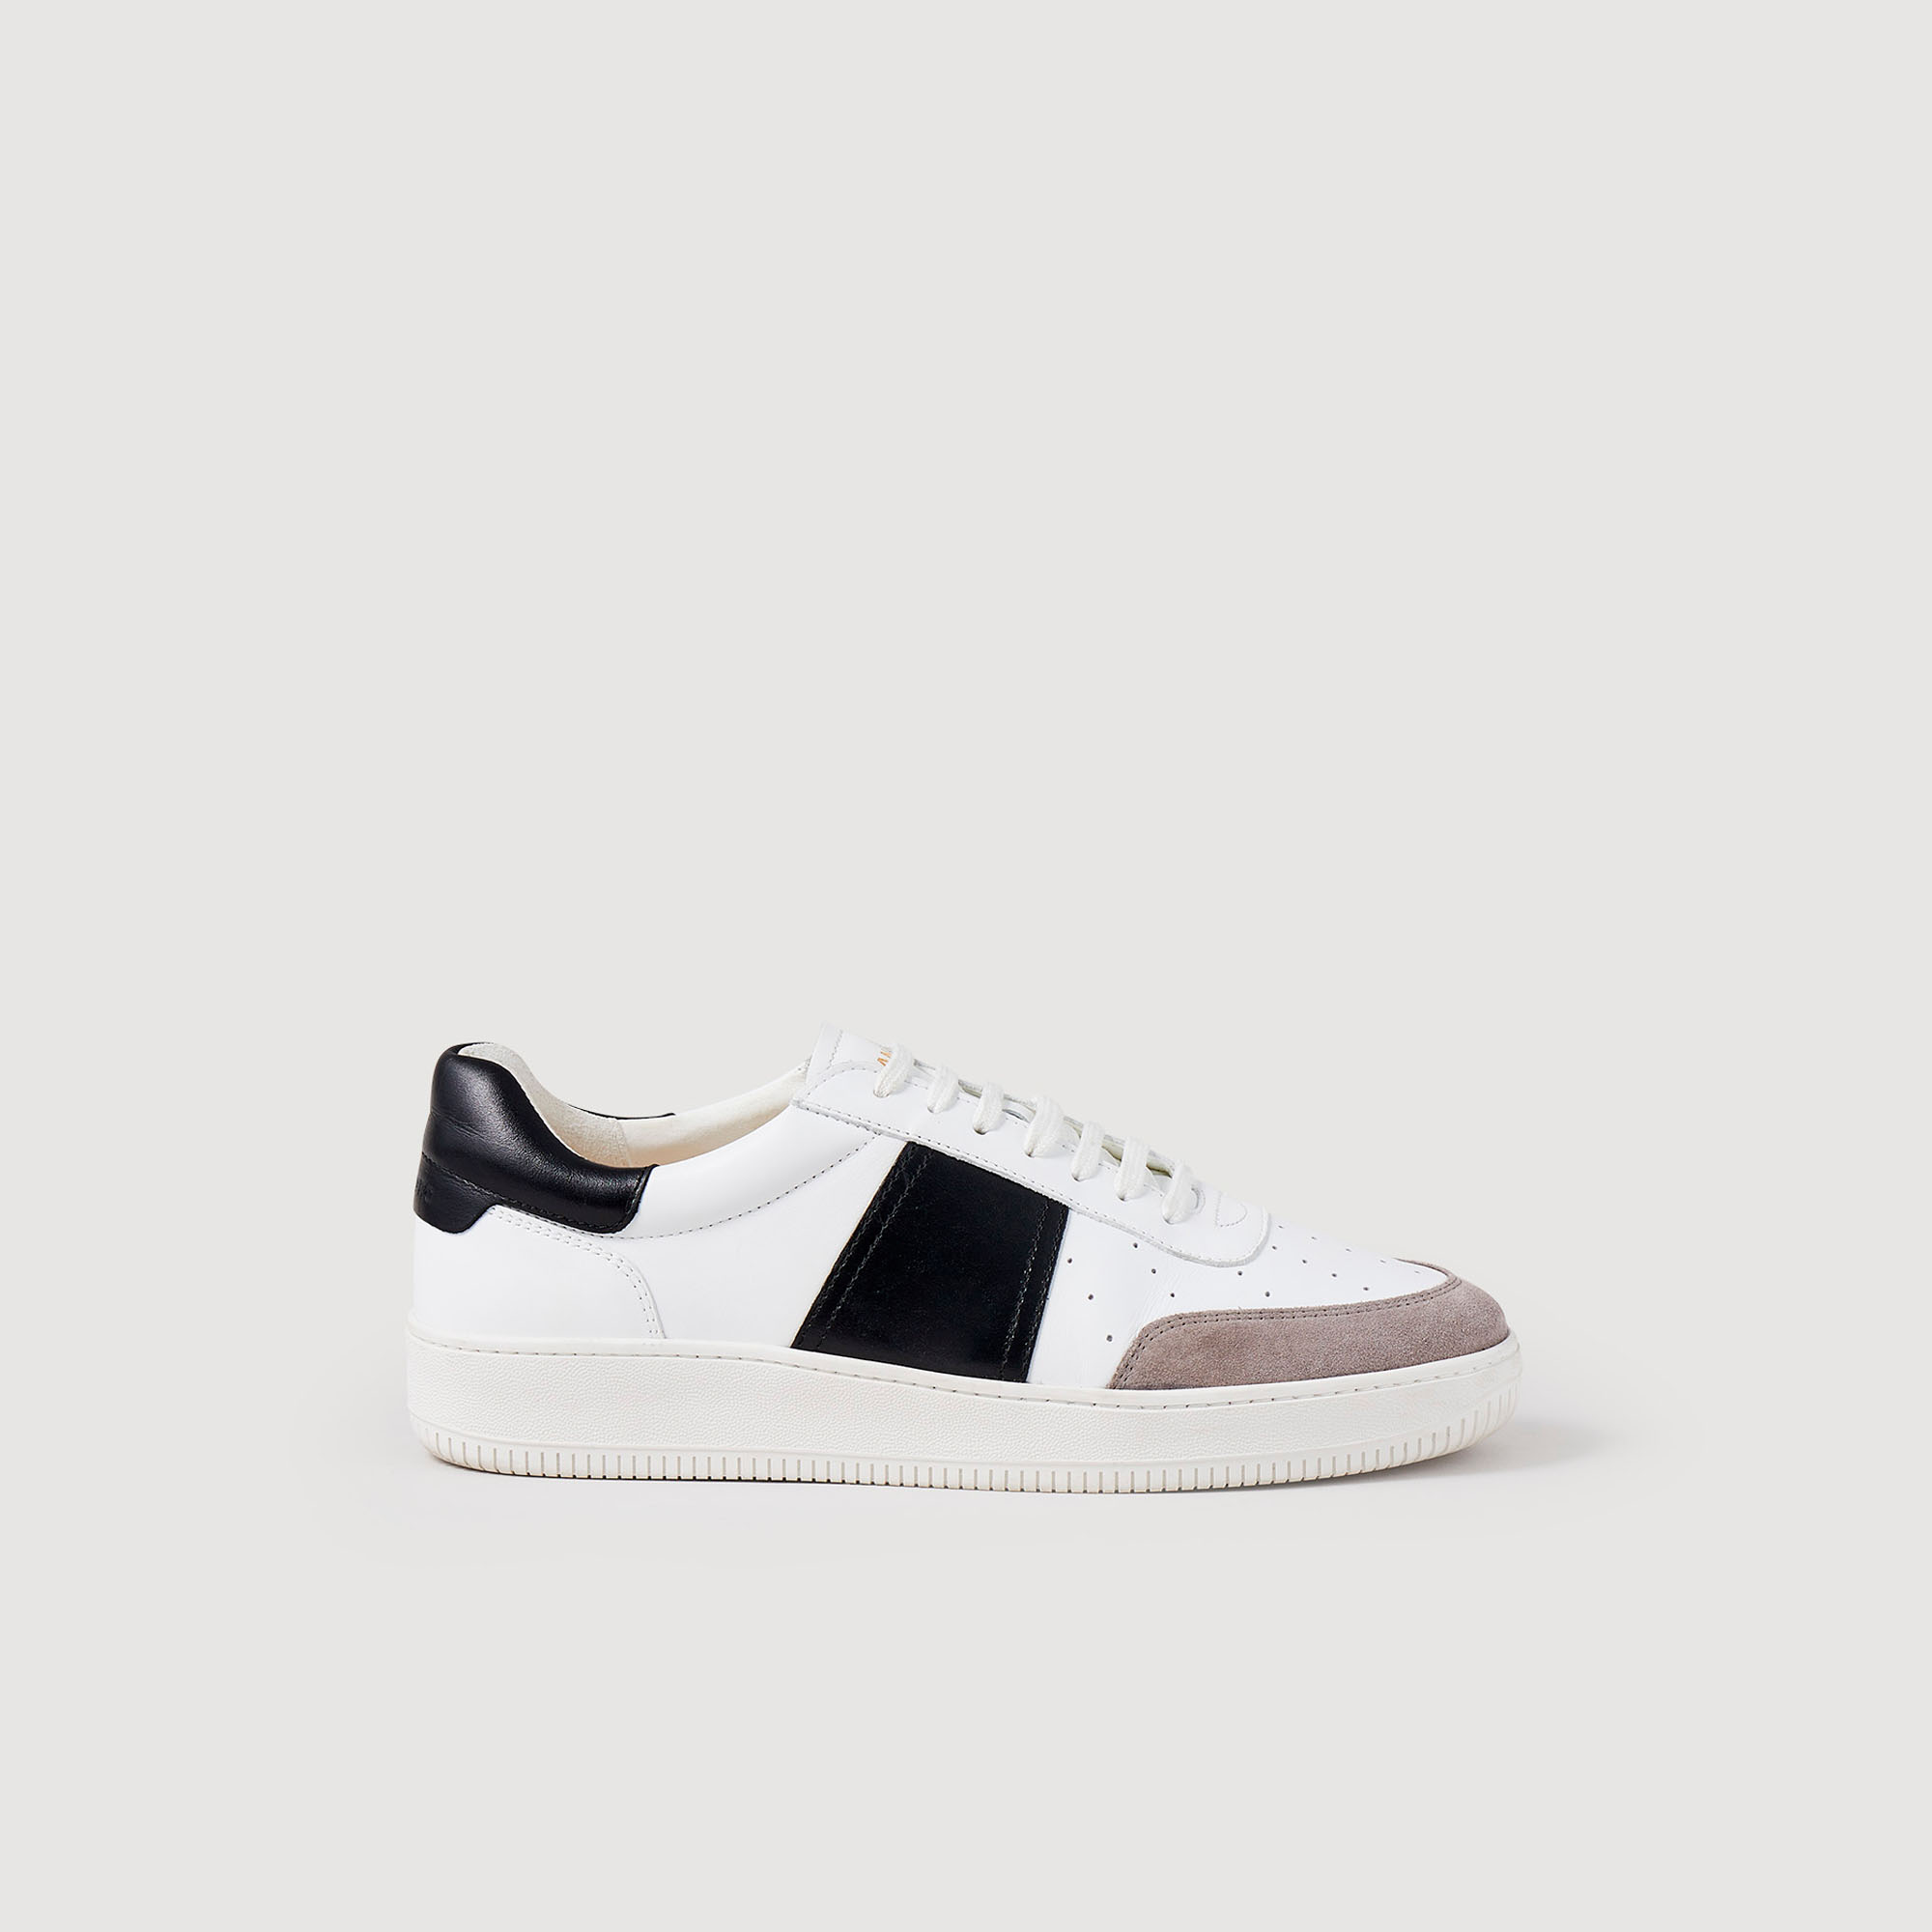 Sandro polyamide Low-top leather and split leather sneakers with lace fastening, Sandro signature on the tongue and logo on the sole